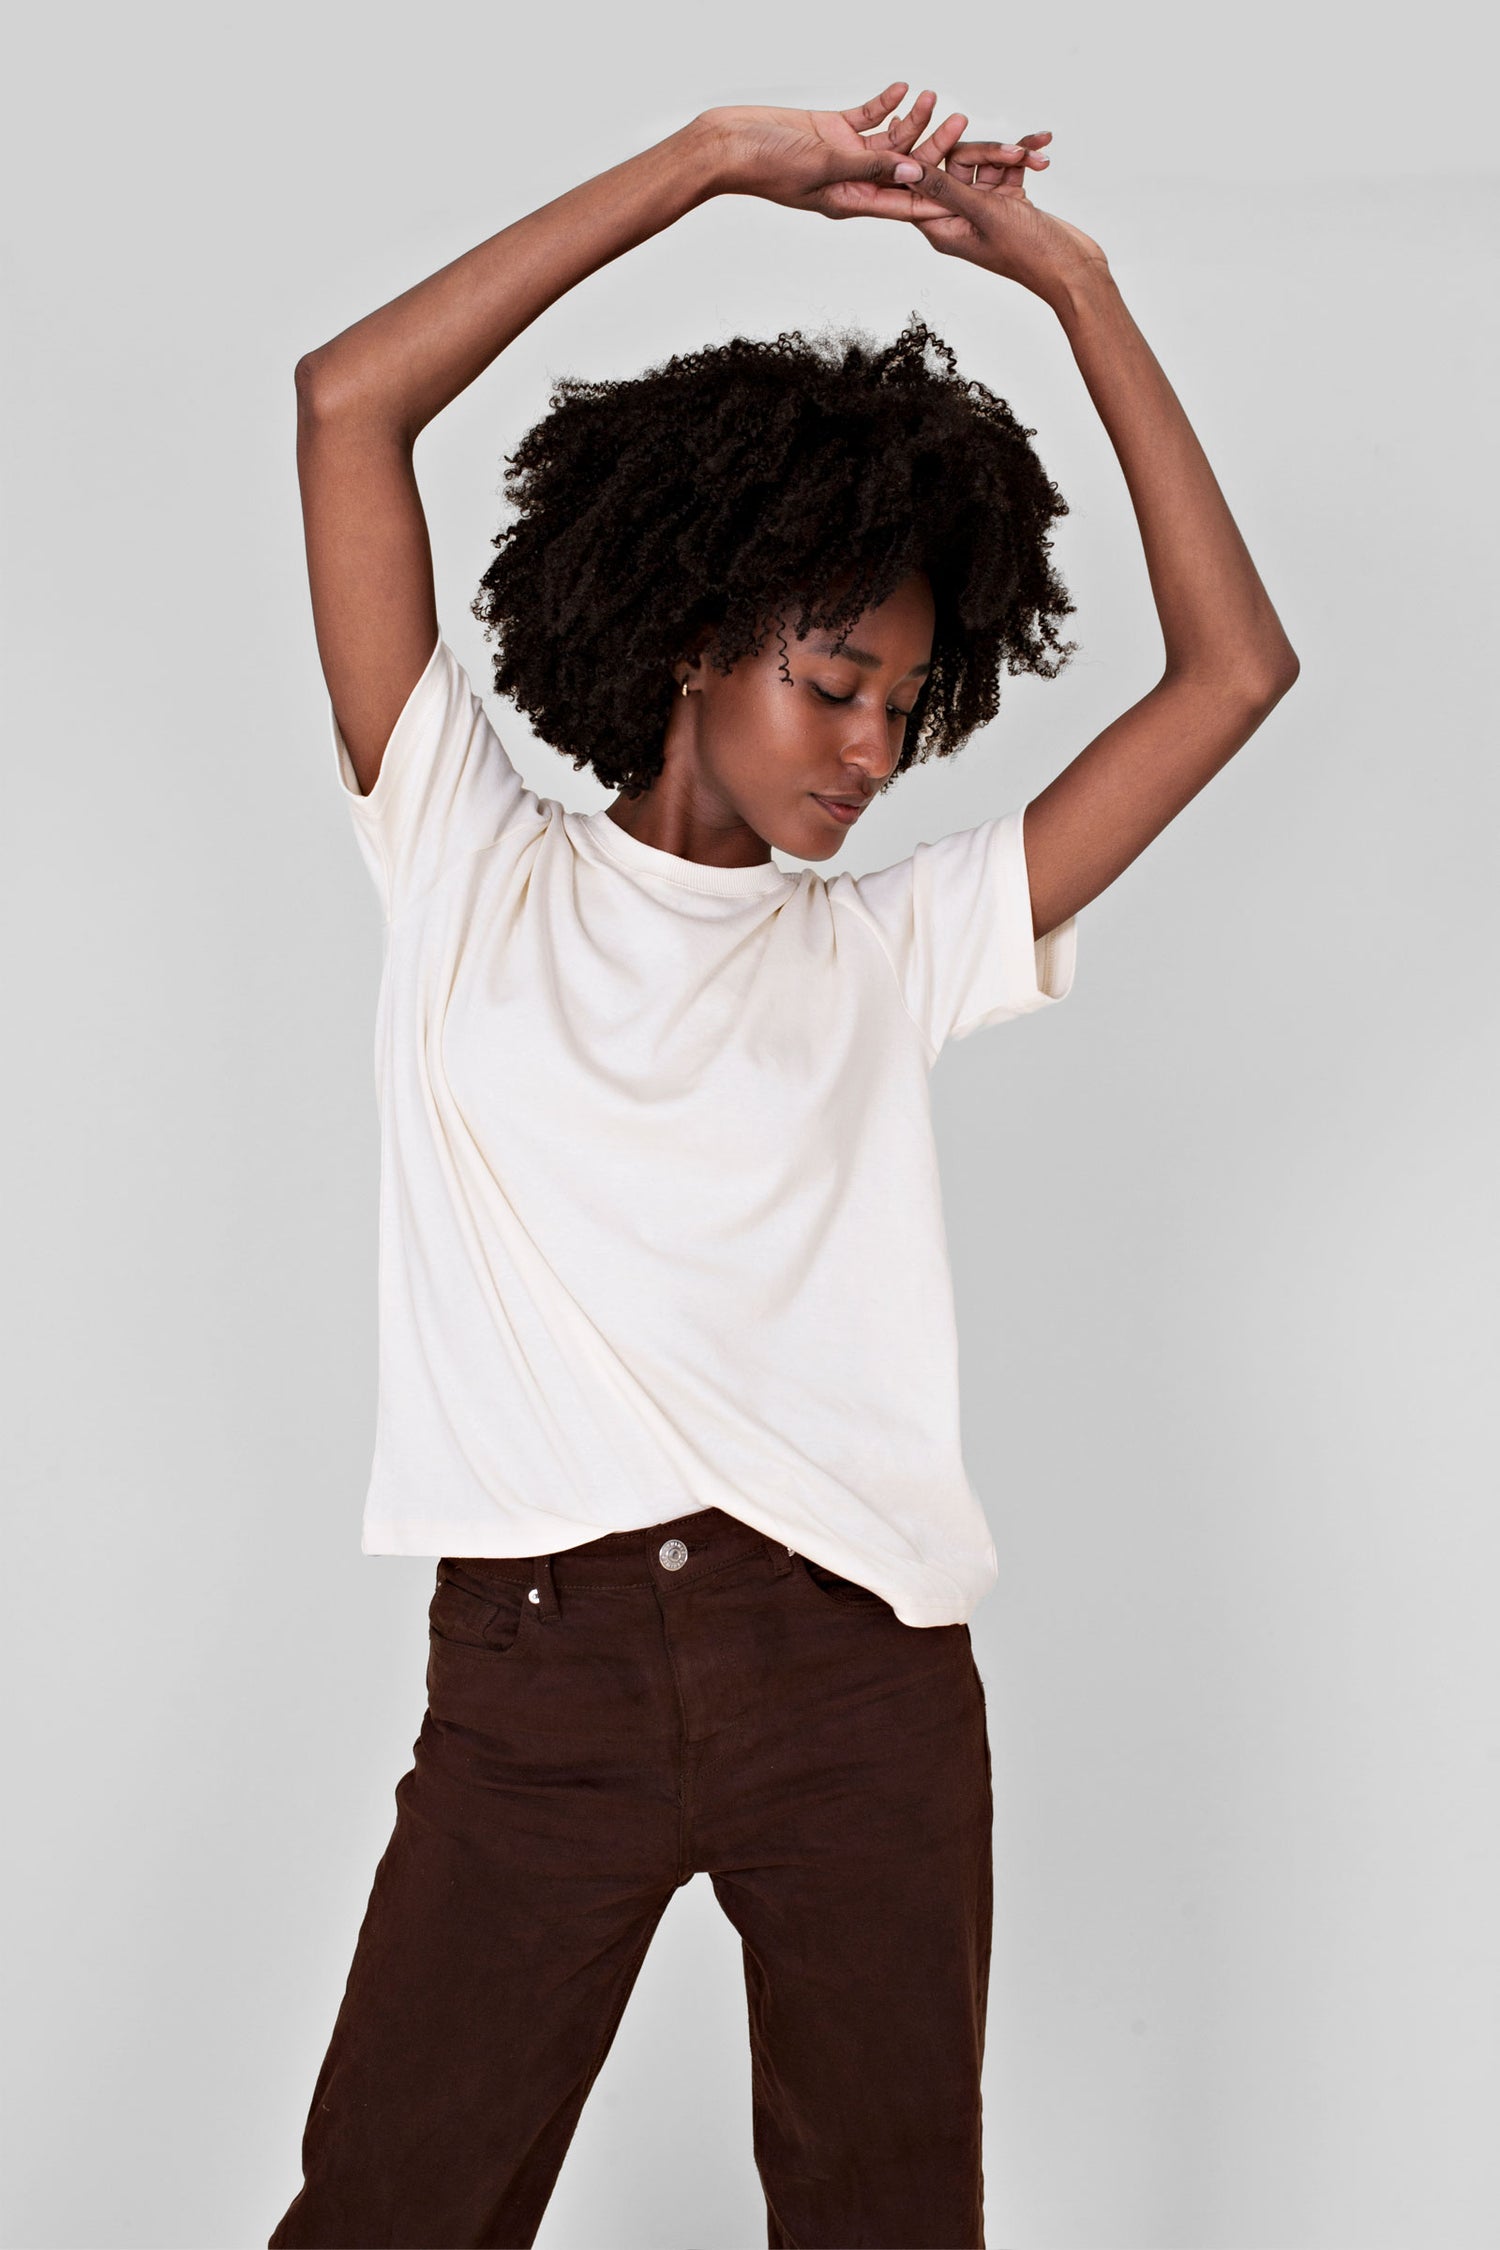 Soft and smooth hemp t-shirt in a relaxed, contemporary fit. Made from a beautiful interlock hemp and organic cotton jersey. Breathable and anti-allergenic to the skin, this comfy hemp t-shirt will easily become your new everyday favorite. Sustainable Fashion by Studio Ten Kate